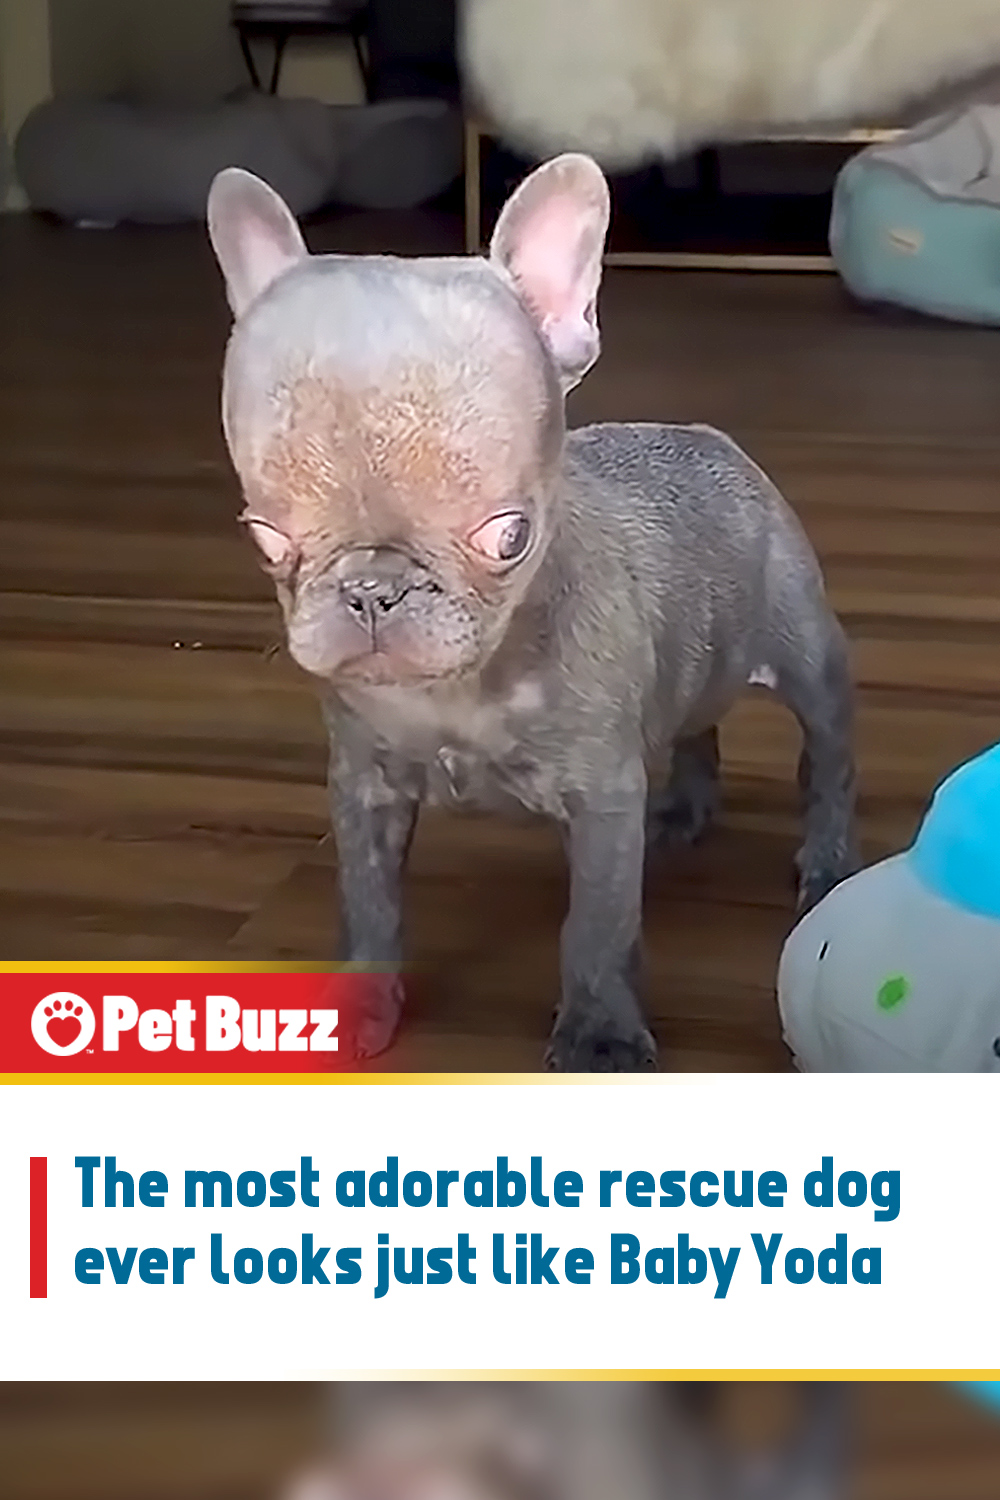 The most adorable rescue dog ever looks just like Baby Yoda